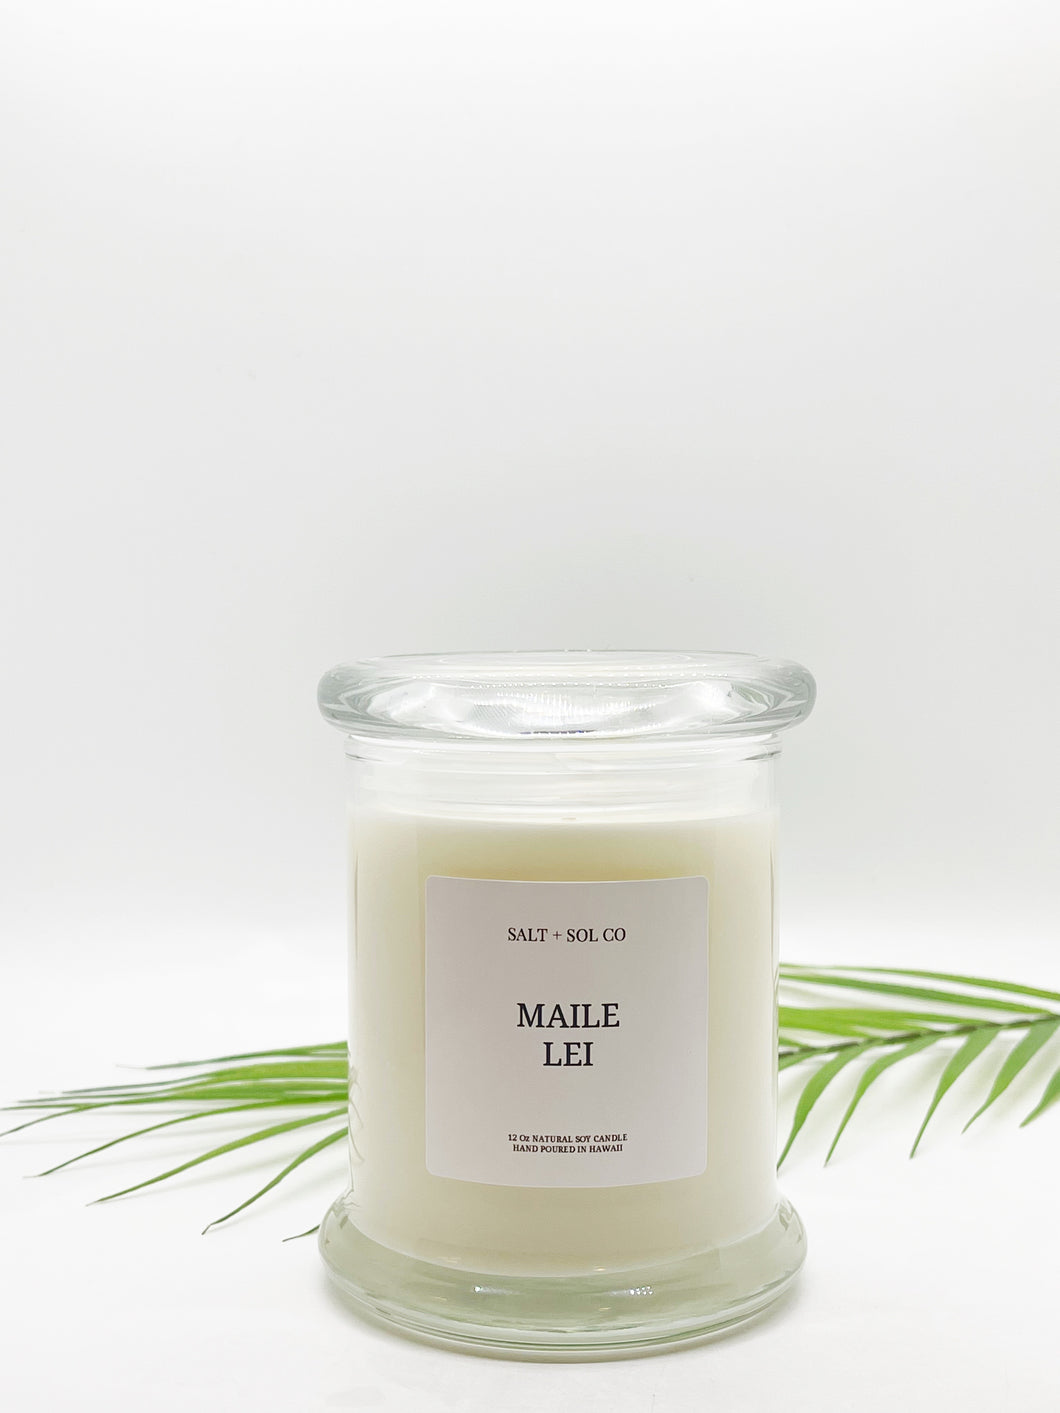 Maile Lei Scented Candle